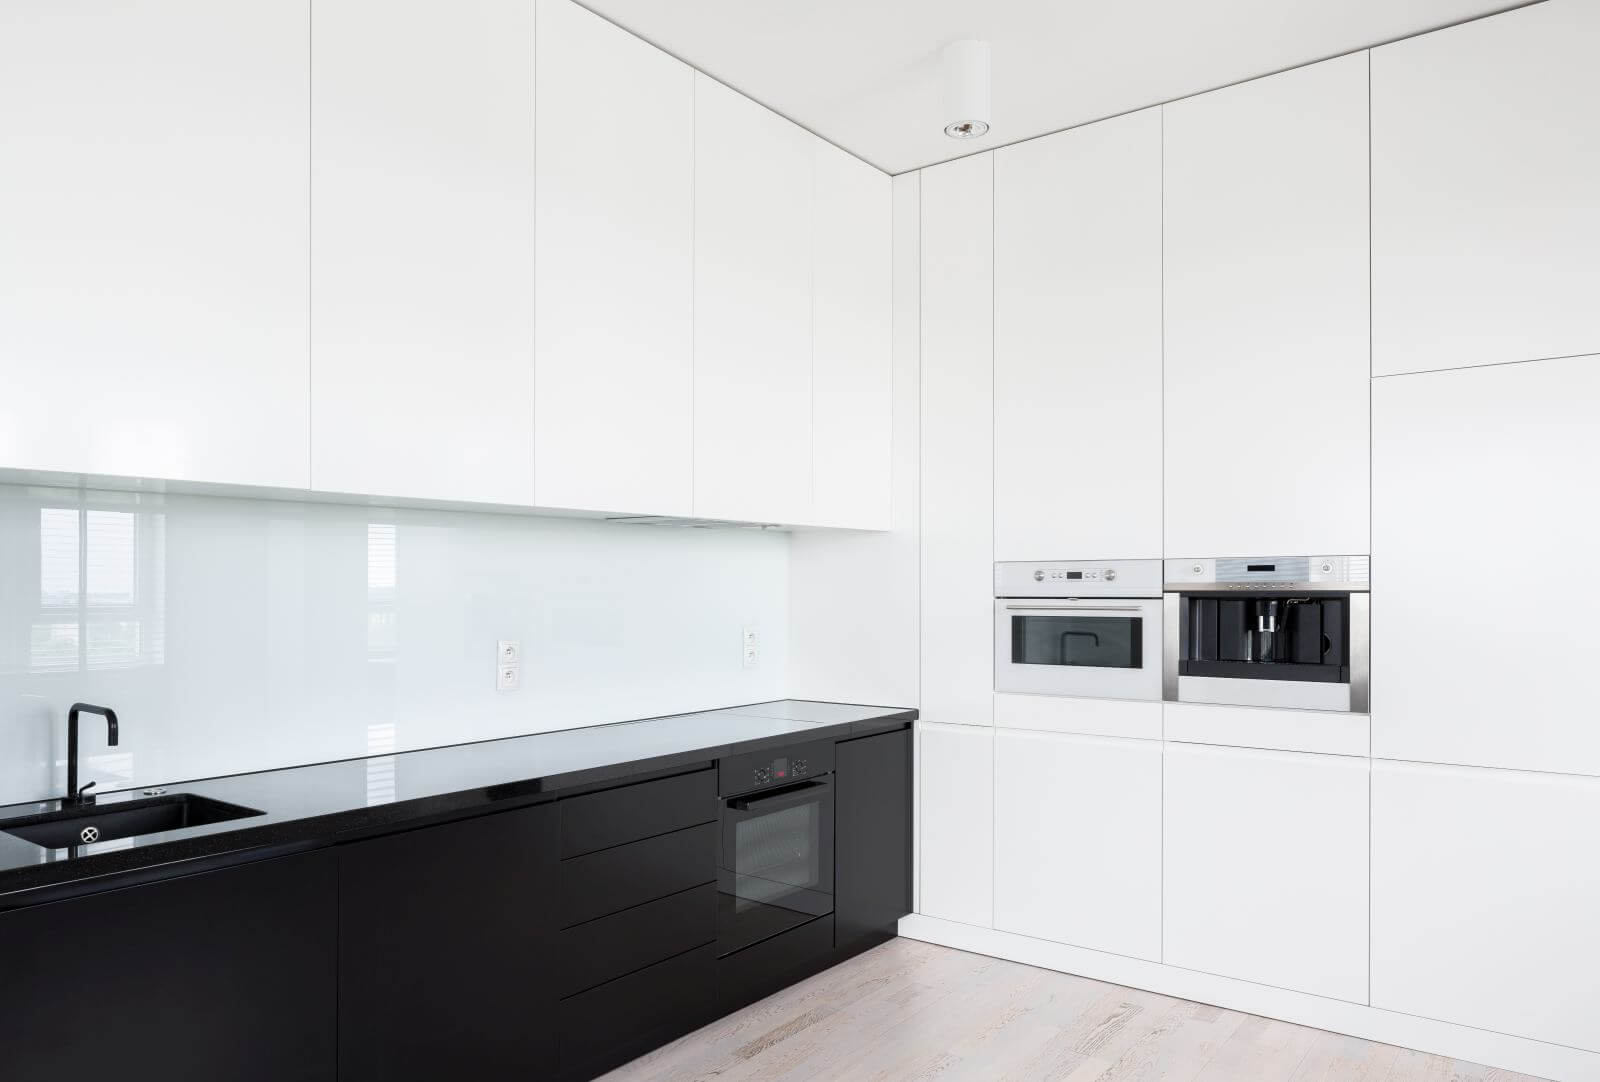 Elegant black and white elegant kitchen with many cupboards and build in kitchen equipment